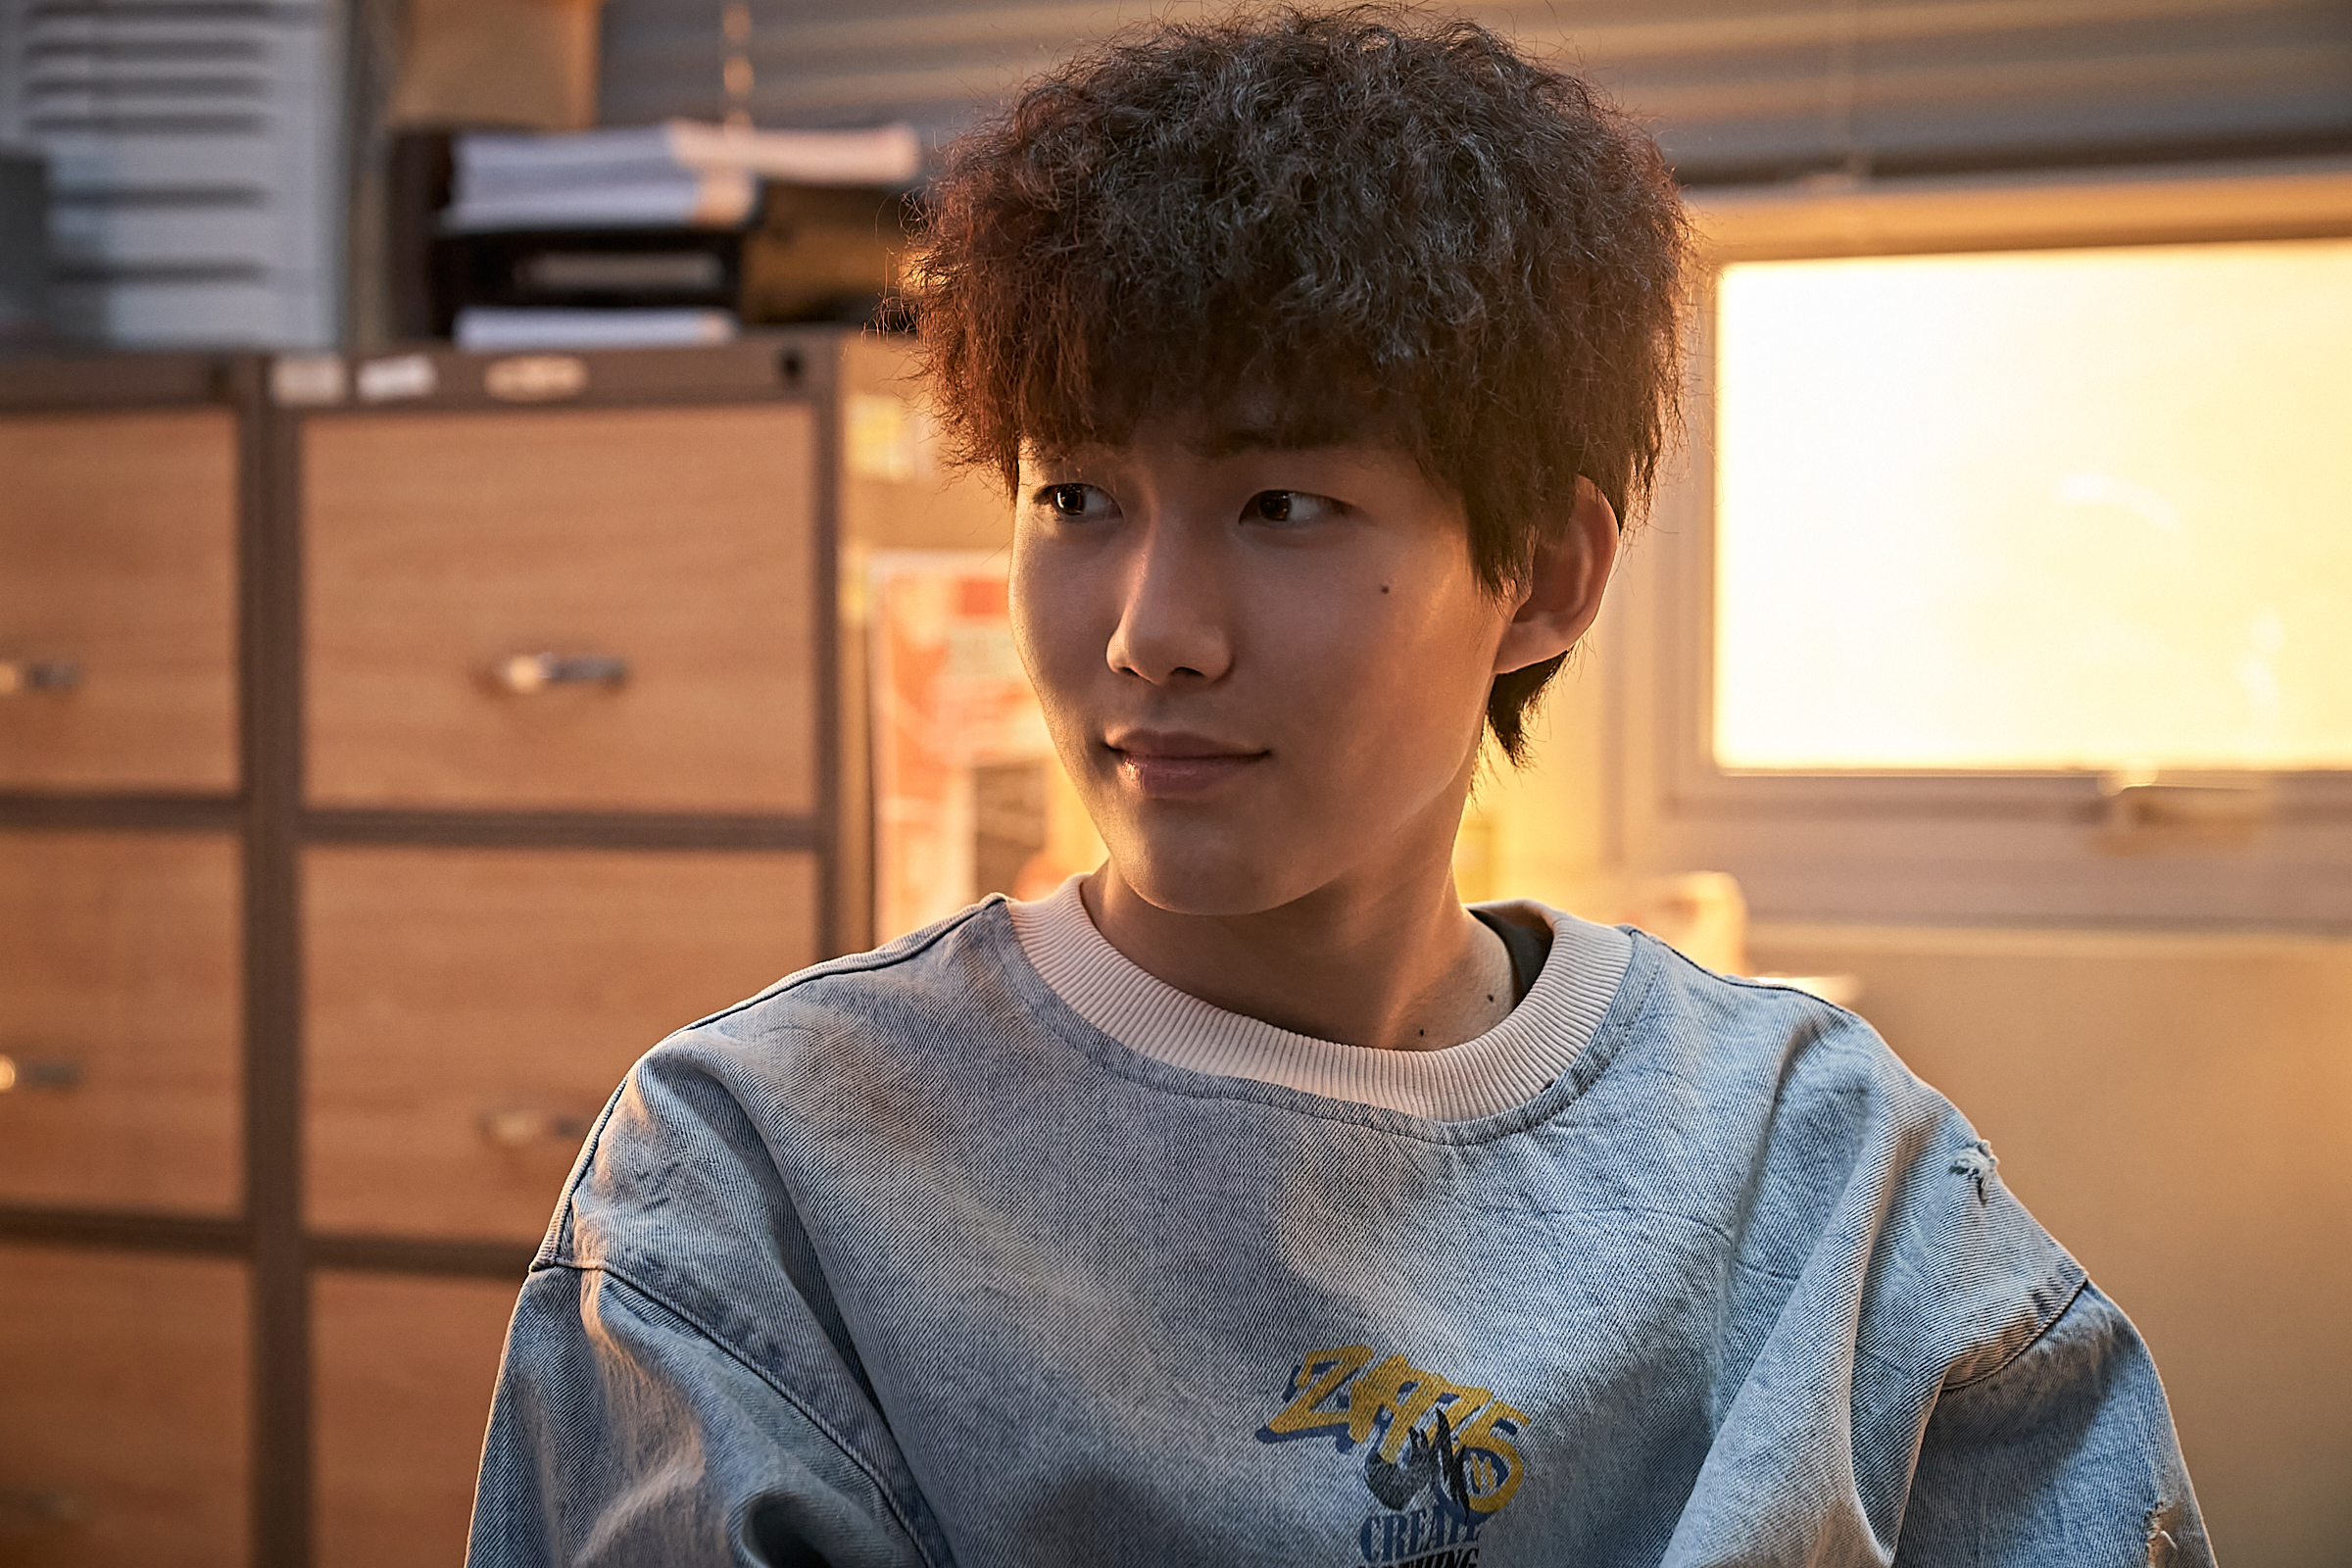 Kang Dong Won Shares A Connection With Lee Mi Sook, Jung Eun Chae, And More In Upcoming Film “The Plot”